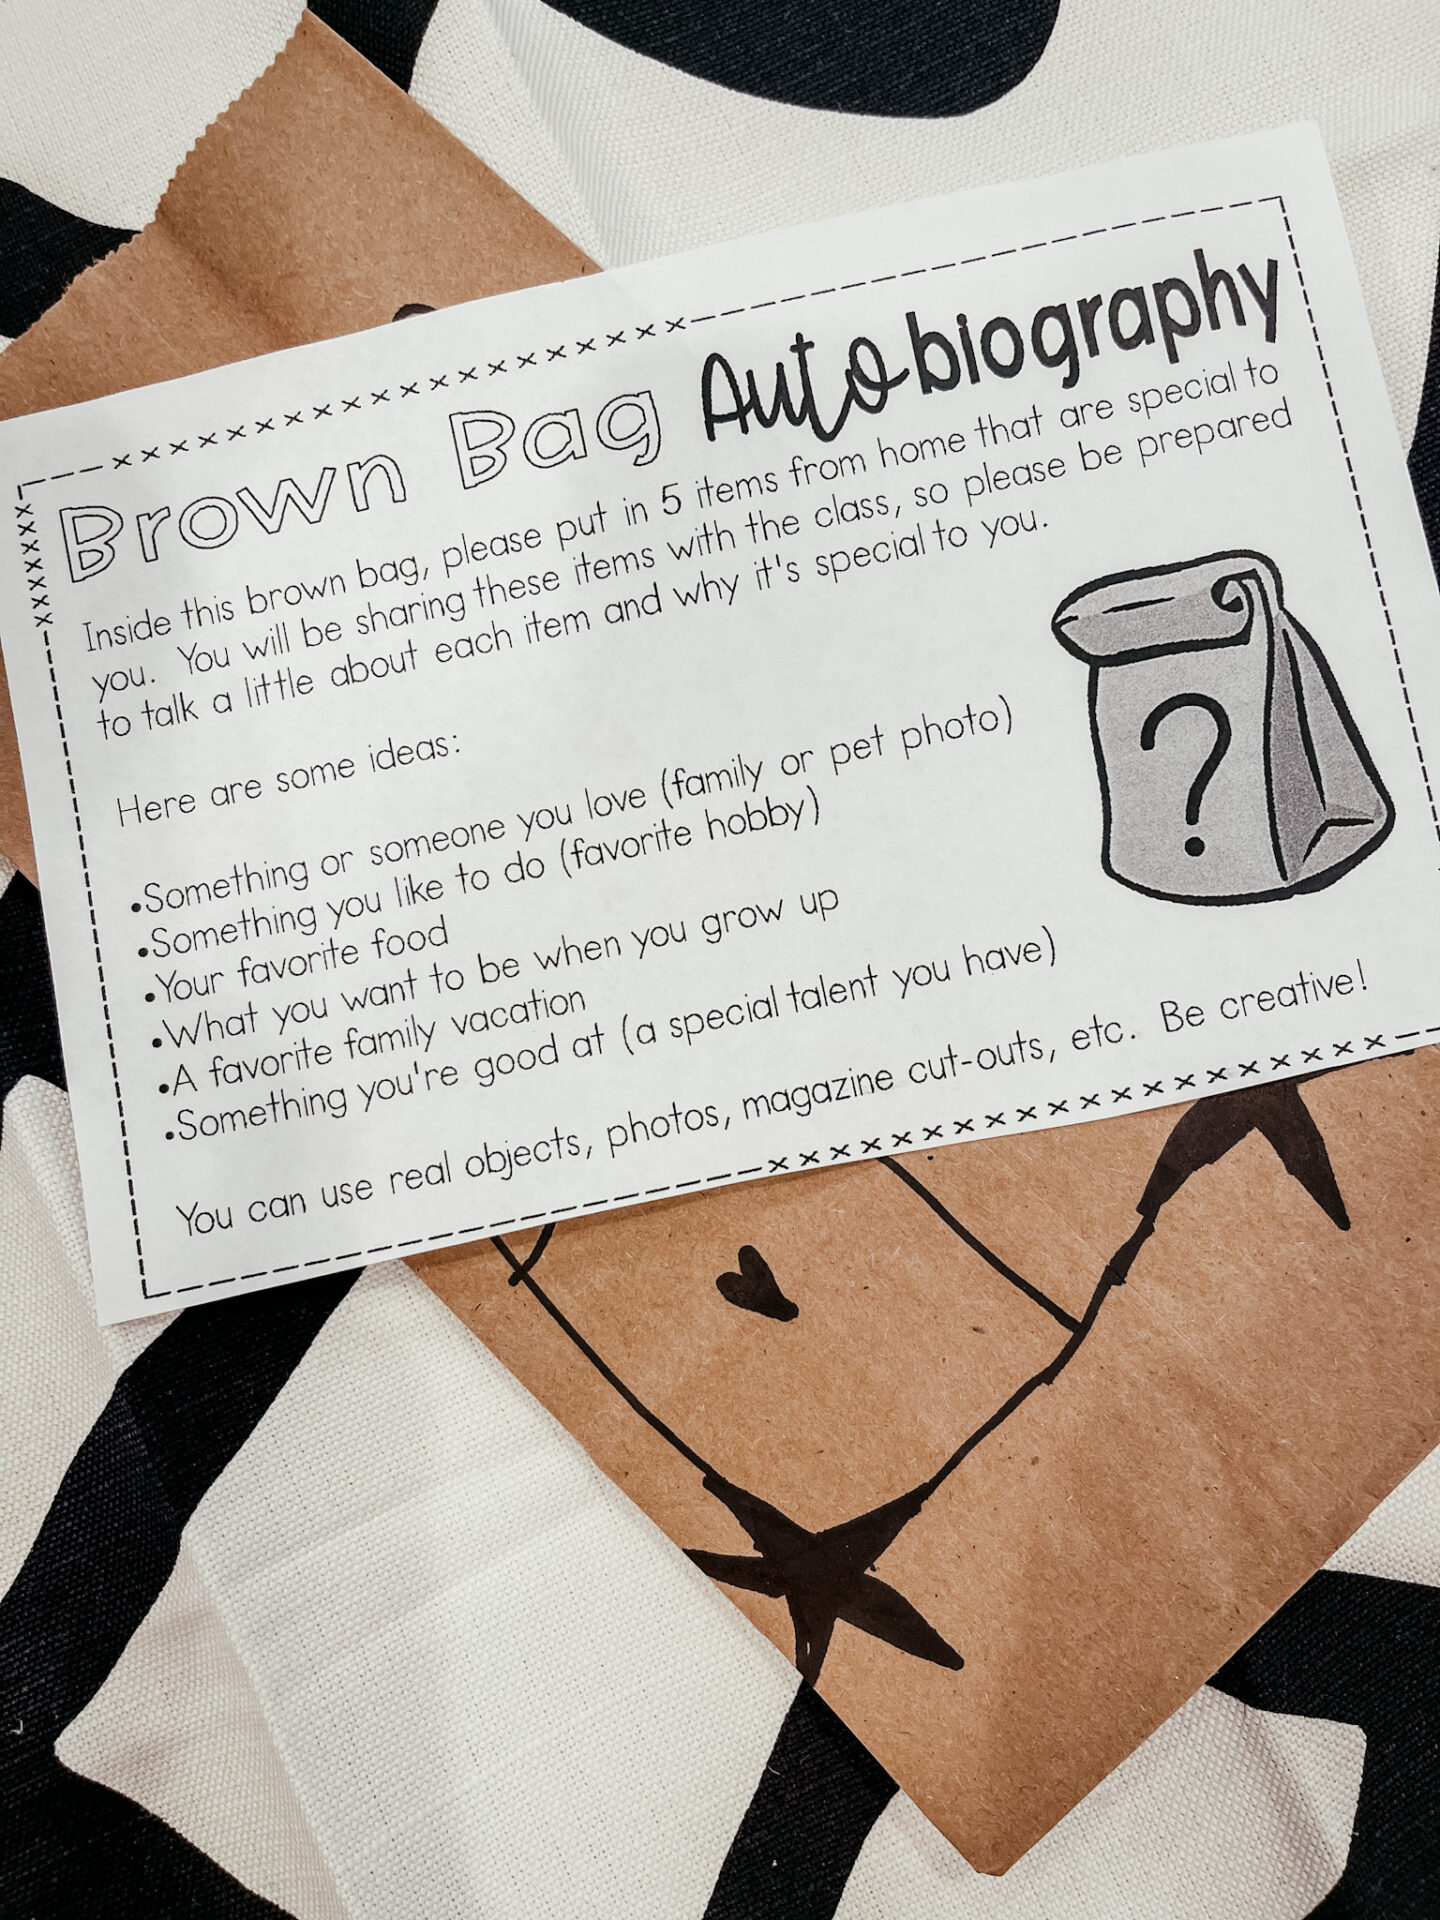 All About Me by popular Nashville lifestyle blog, Hello Happiness: image of a brown bag auto biography project. 